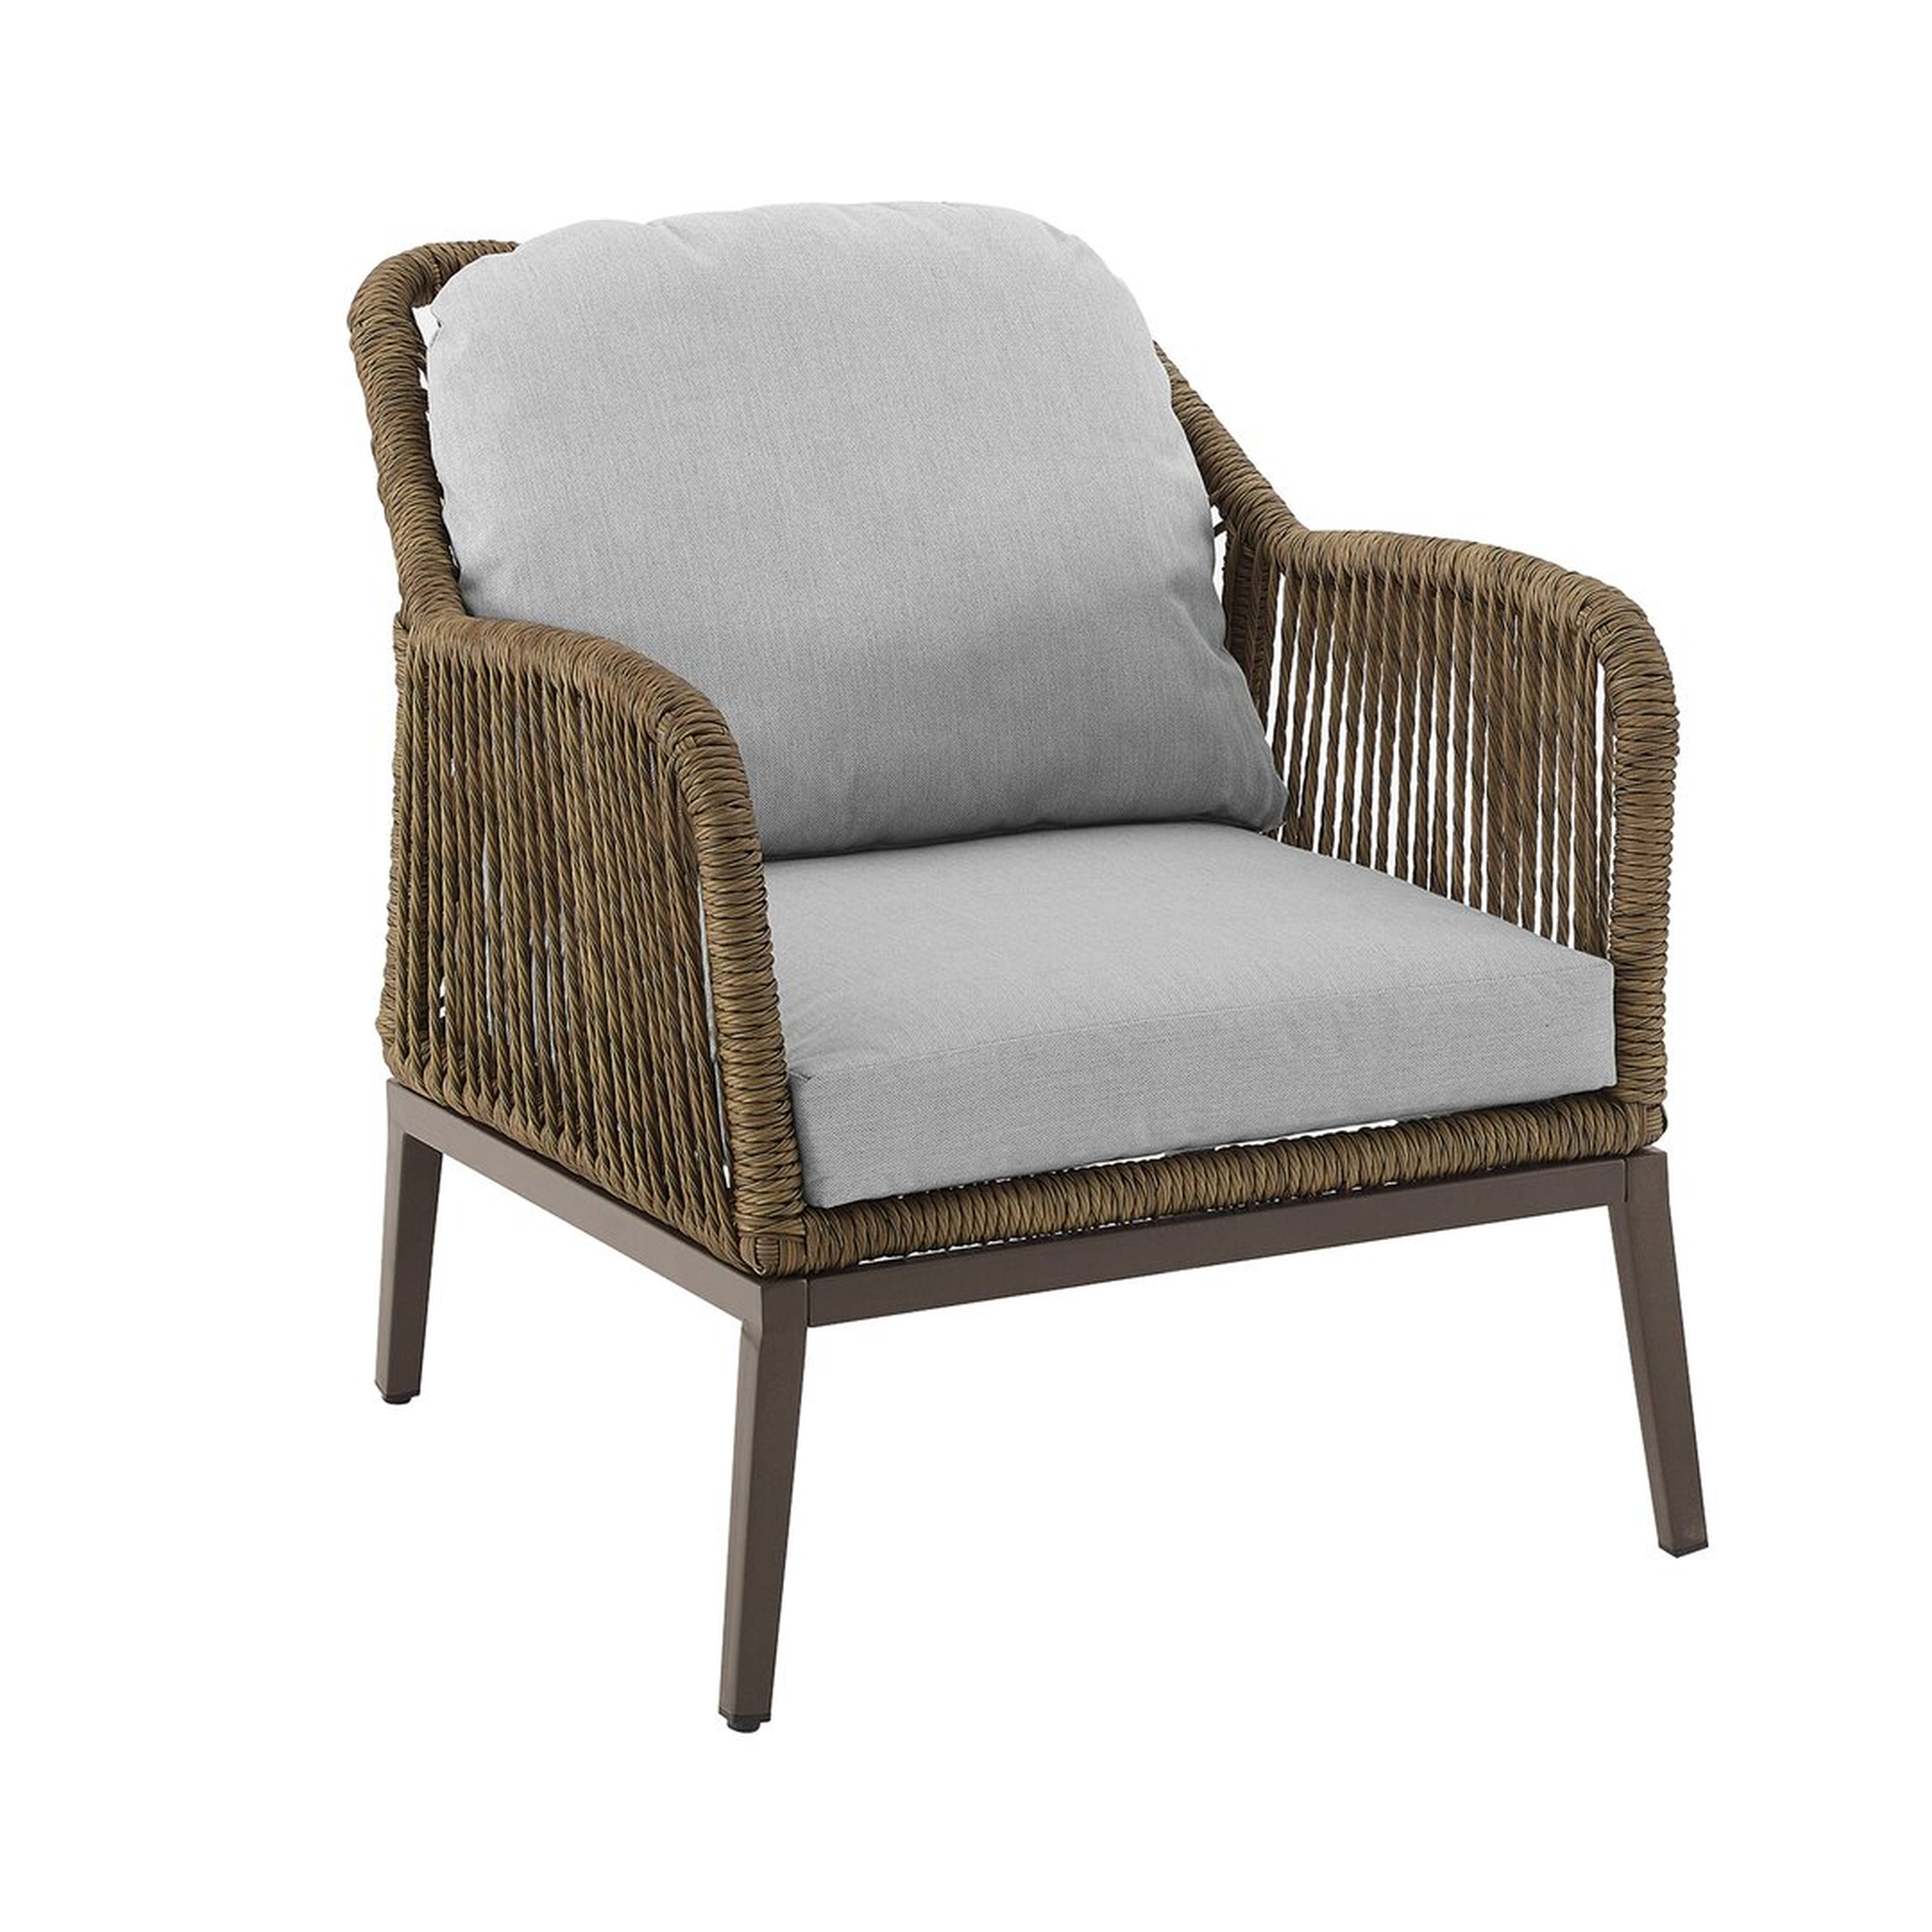 "Crosley Haven Patio Chair with Cushions" - Perigold